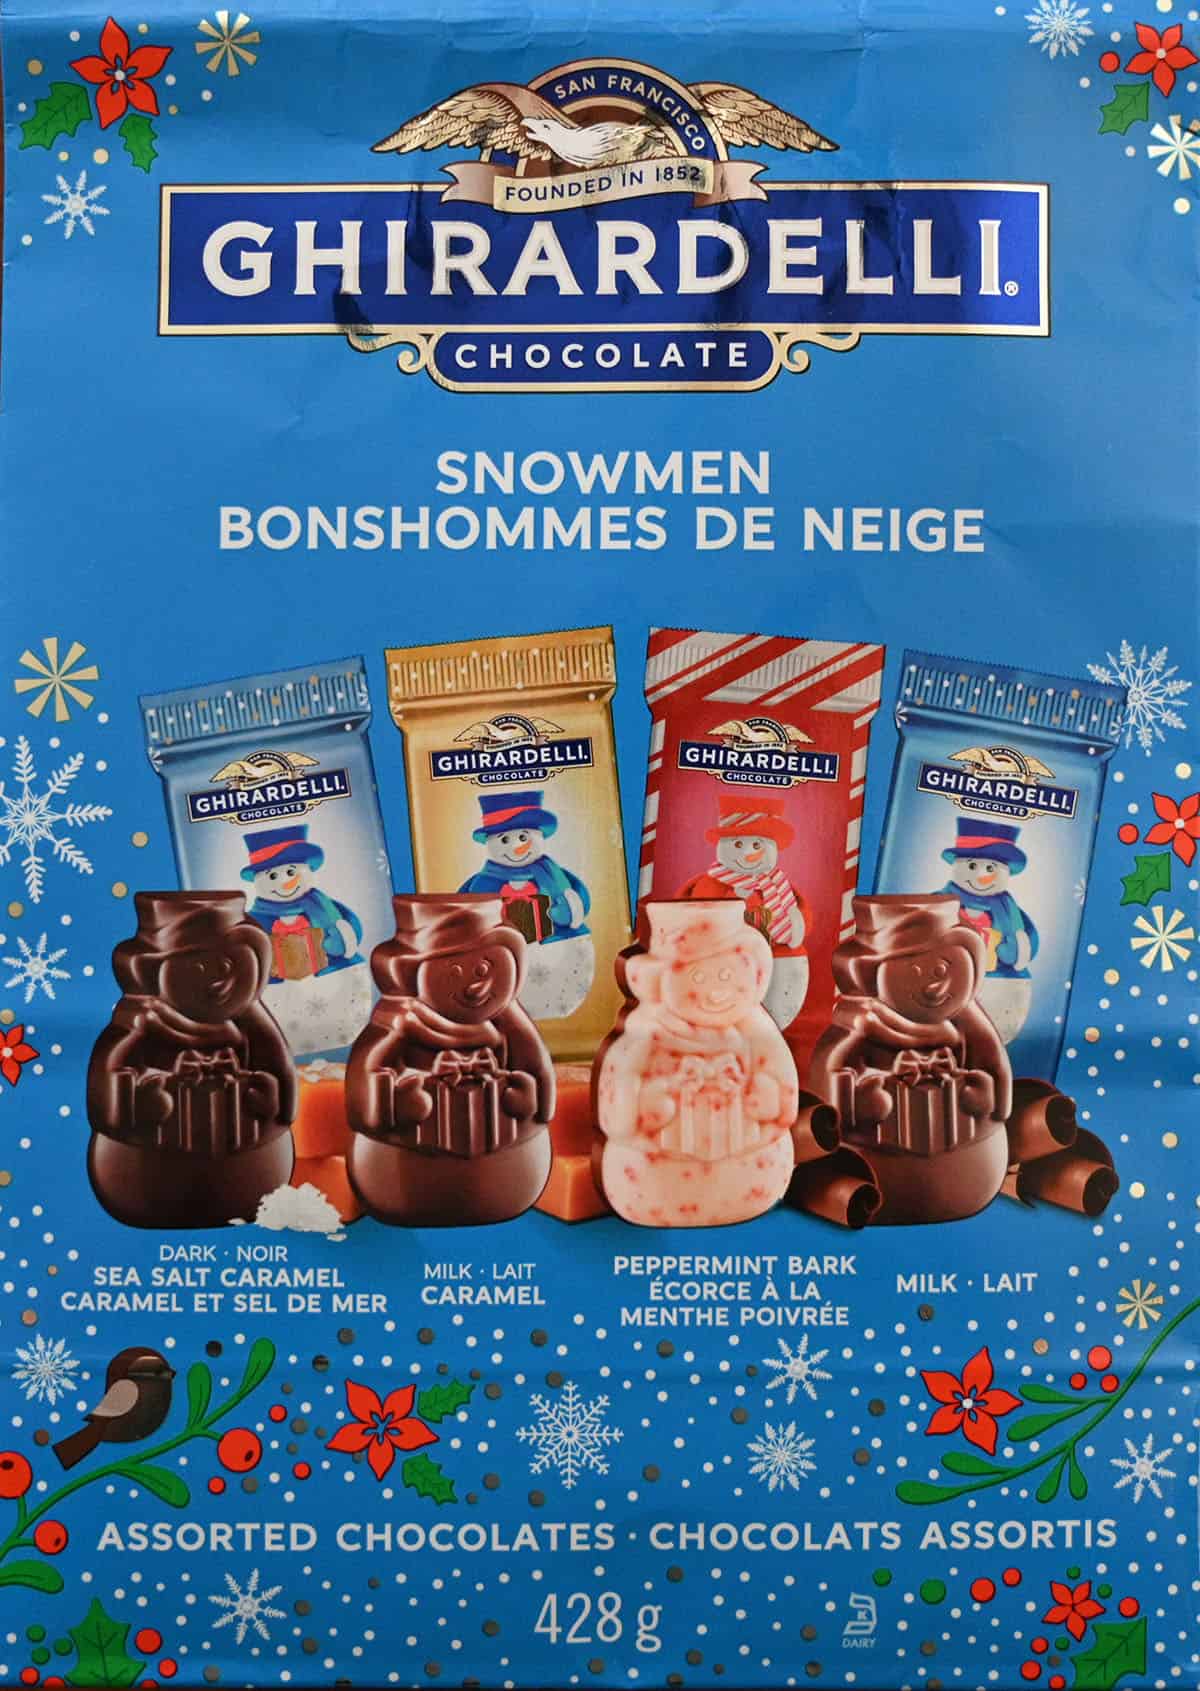 Closeup image of the front of the bag of chocolate snowmen showing the weight of the bag and four flavors of snowmen.